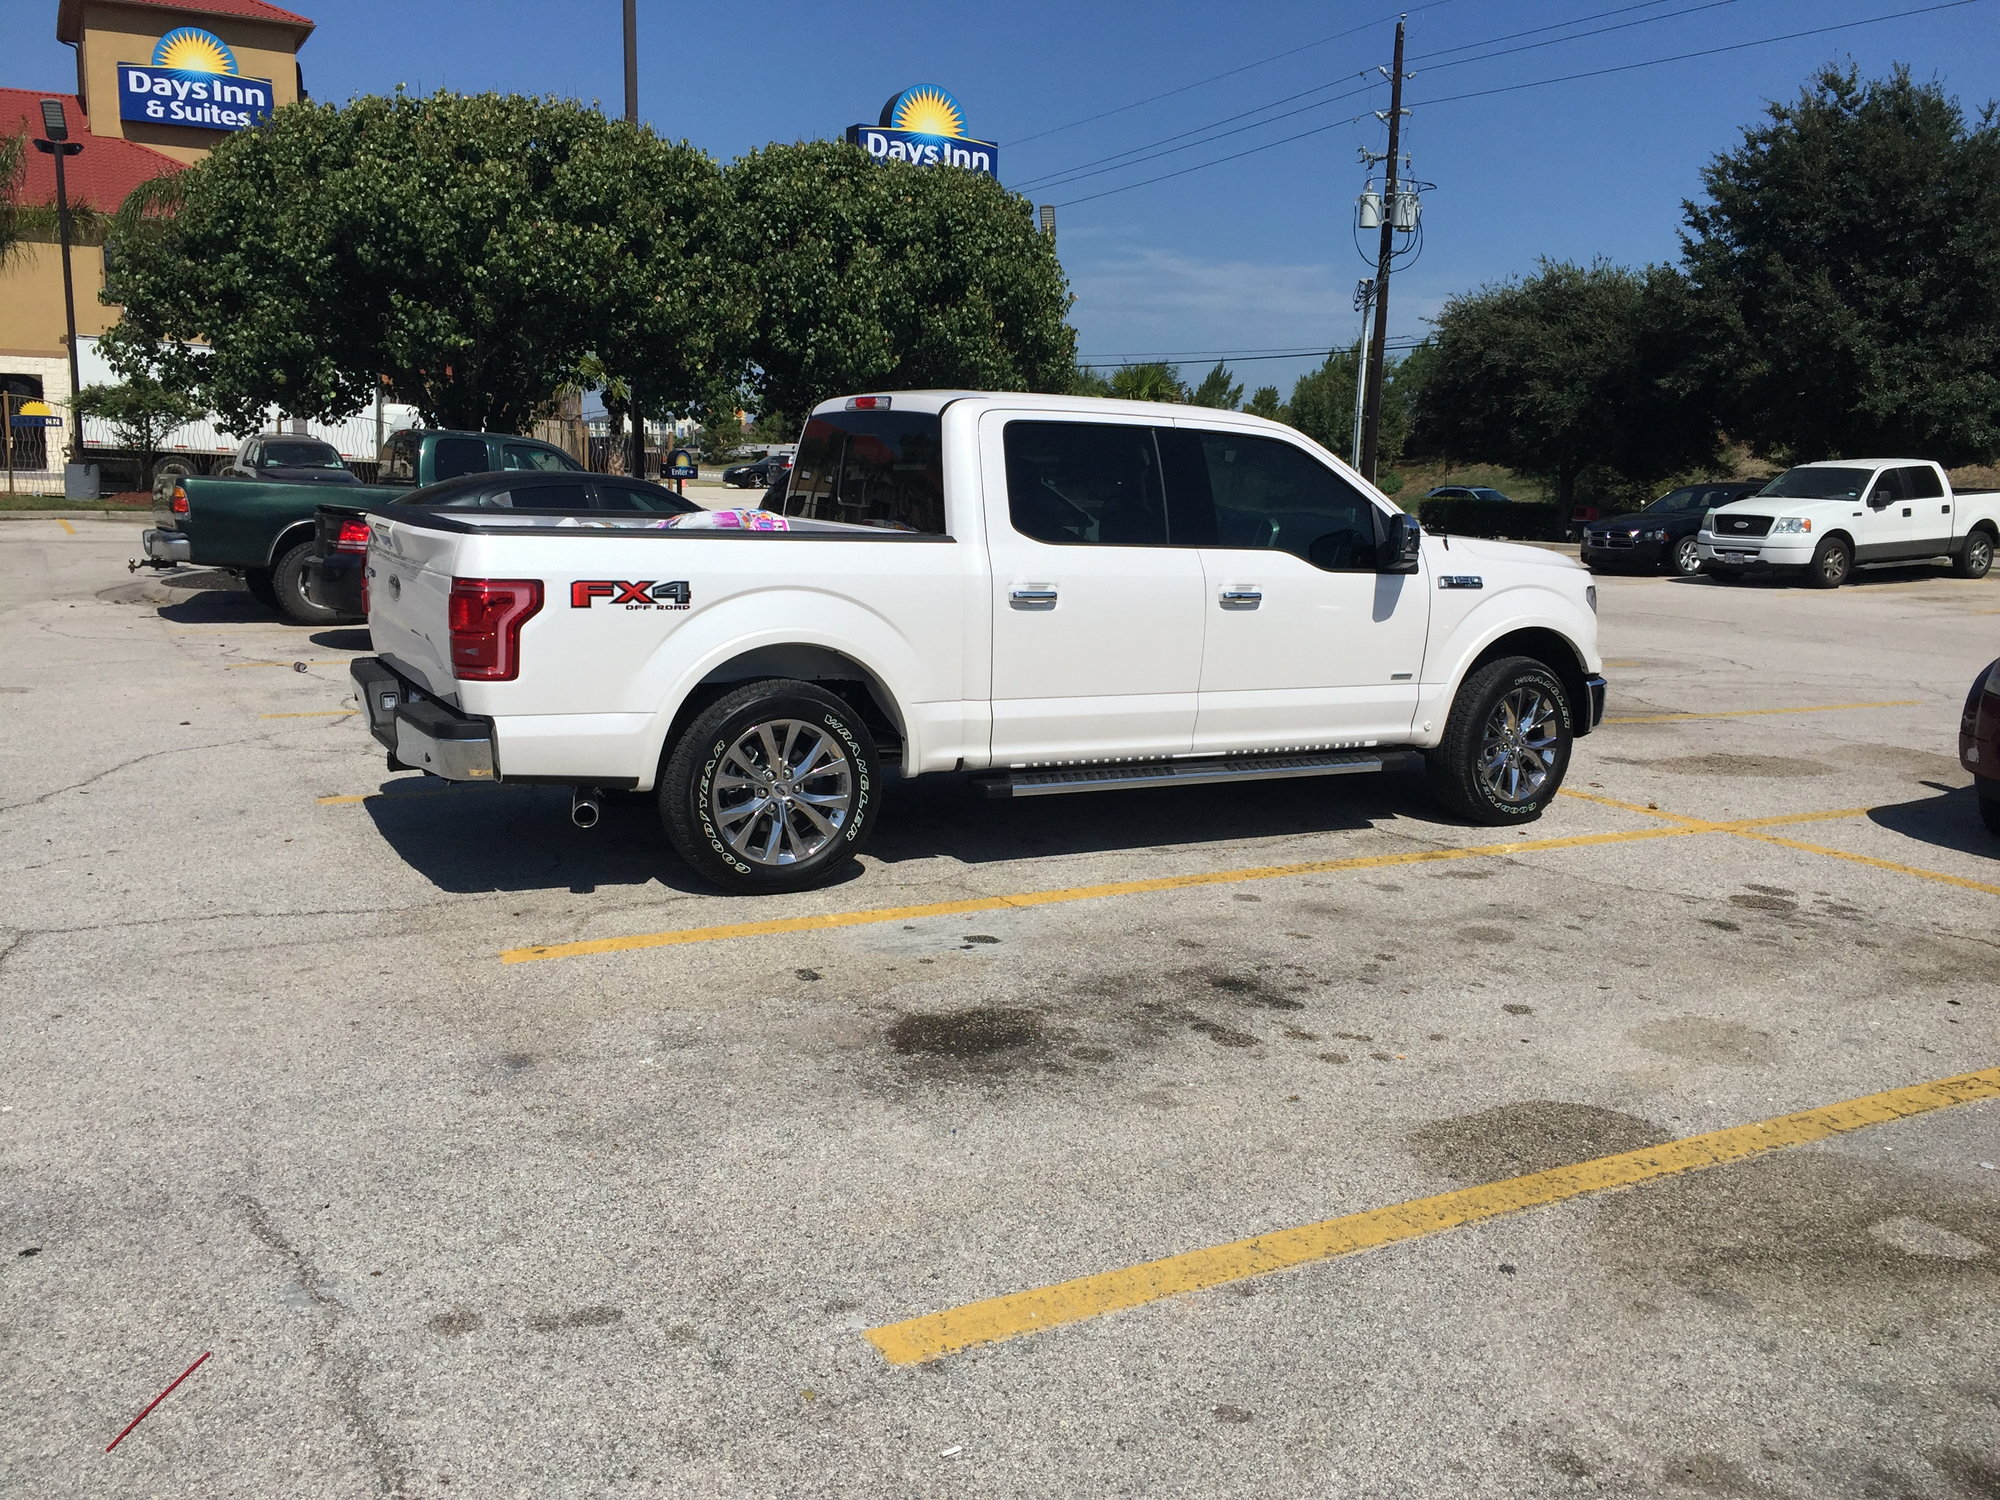 2 Or 2 5 Leveling Kit Reprised F150online Forums